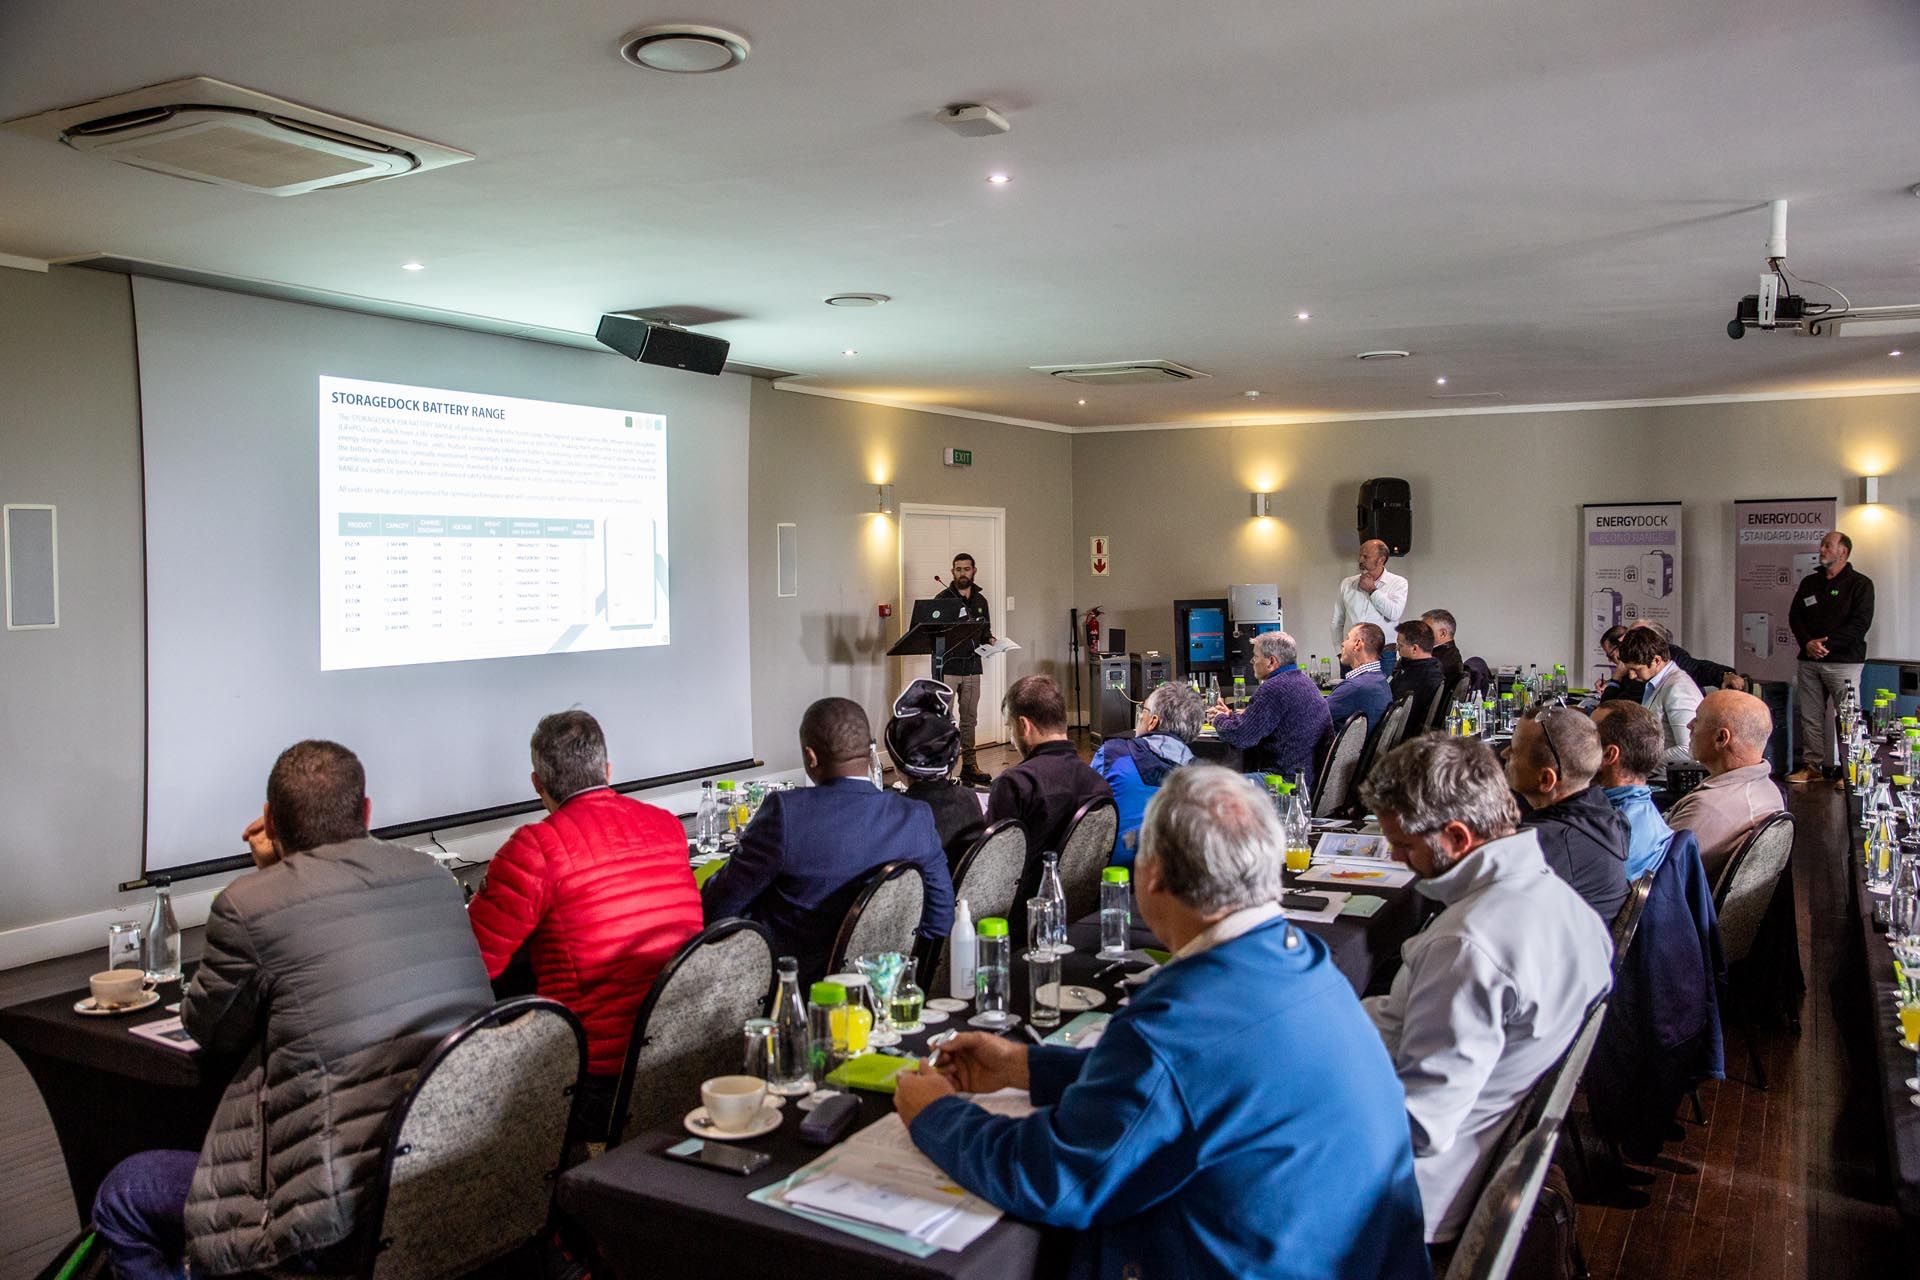 Training attendees at conference at Fancourt George by Specialized Solar Systems